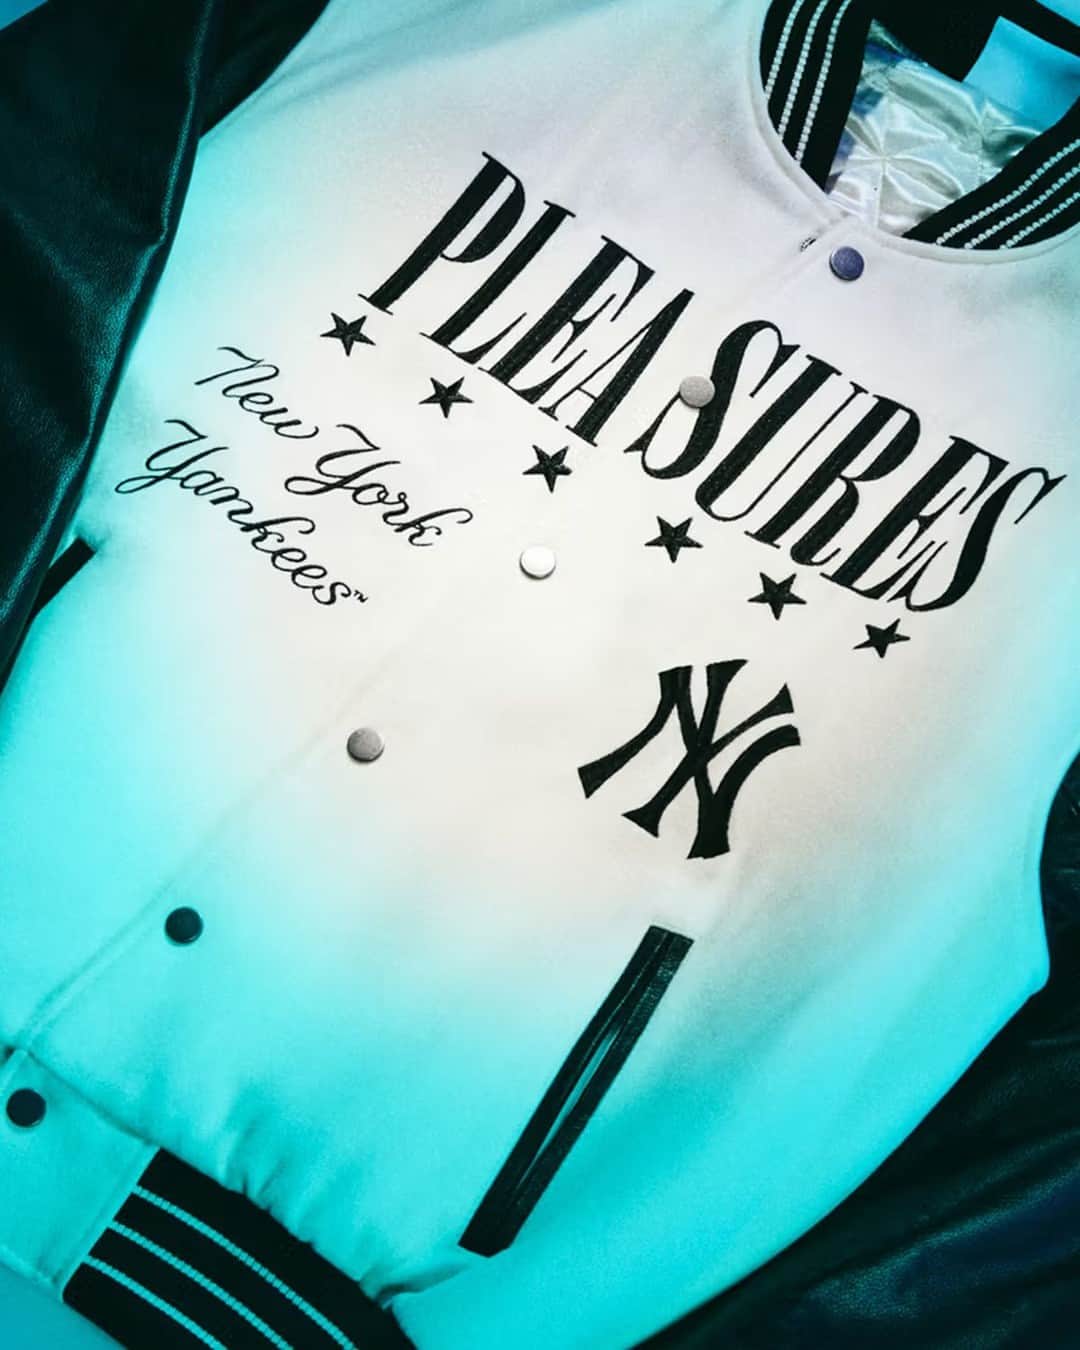 HYPEBEASTのインスタグラム：「After unveiling an initial collaborative collection back in August, @pleasures, the @mlb and @fanatics are running it back. Expanding upon the first installment, this second delivery boasts 29 pieces for a handful of MLB teams including the San Francisco Giants, the New York Yankees, the Chicago White Sox, the Los Angeles Dodgers the Chicago Cubs, the New York Mets and the Philadelphia Phillies.⁠ ⁠ Apparel spans sporty outerwear – tracksuits and varsity leather jackets – as well as knitwear and fleece winter essentials. Available in two vibrant colorways, printed cardigans feature fuzzy silhouettes, each complete with a white team logo patch on the left side. Elsewhere, pinstriped denim pants feature team logo patches embroidered on the back pocket.⁠ ⁠ Shop the collection now at select MLB ballparks, as well as on PLEASURES, MLB, and Fanatics’ websites.⁠ Photo: PLEASURES」